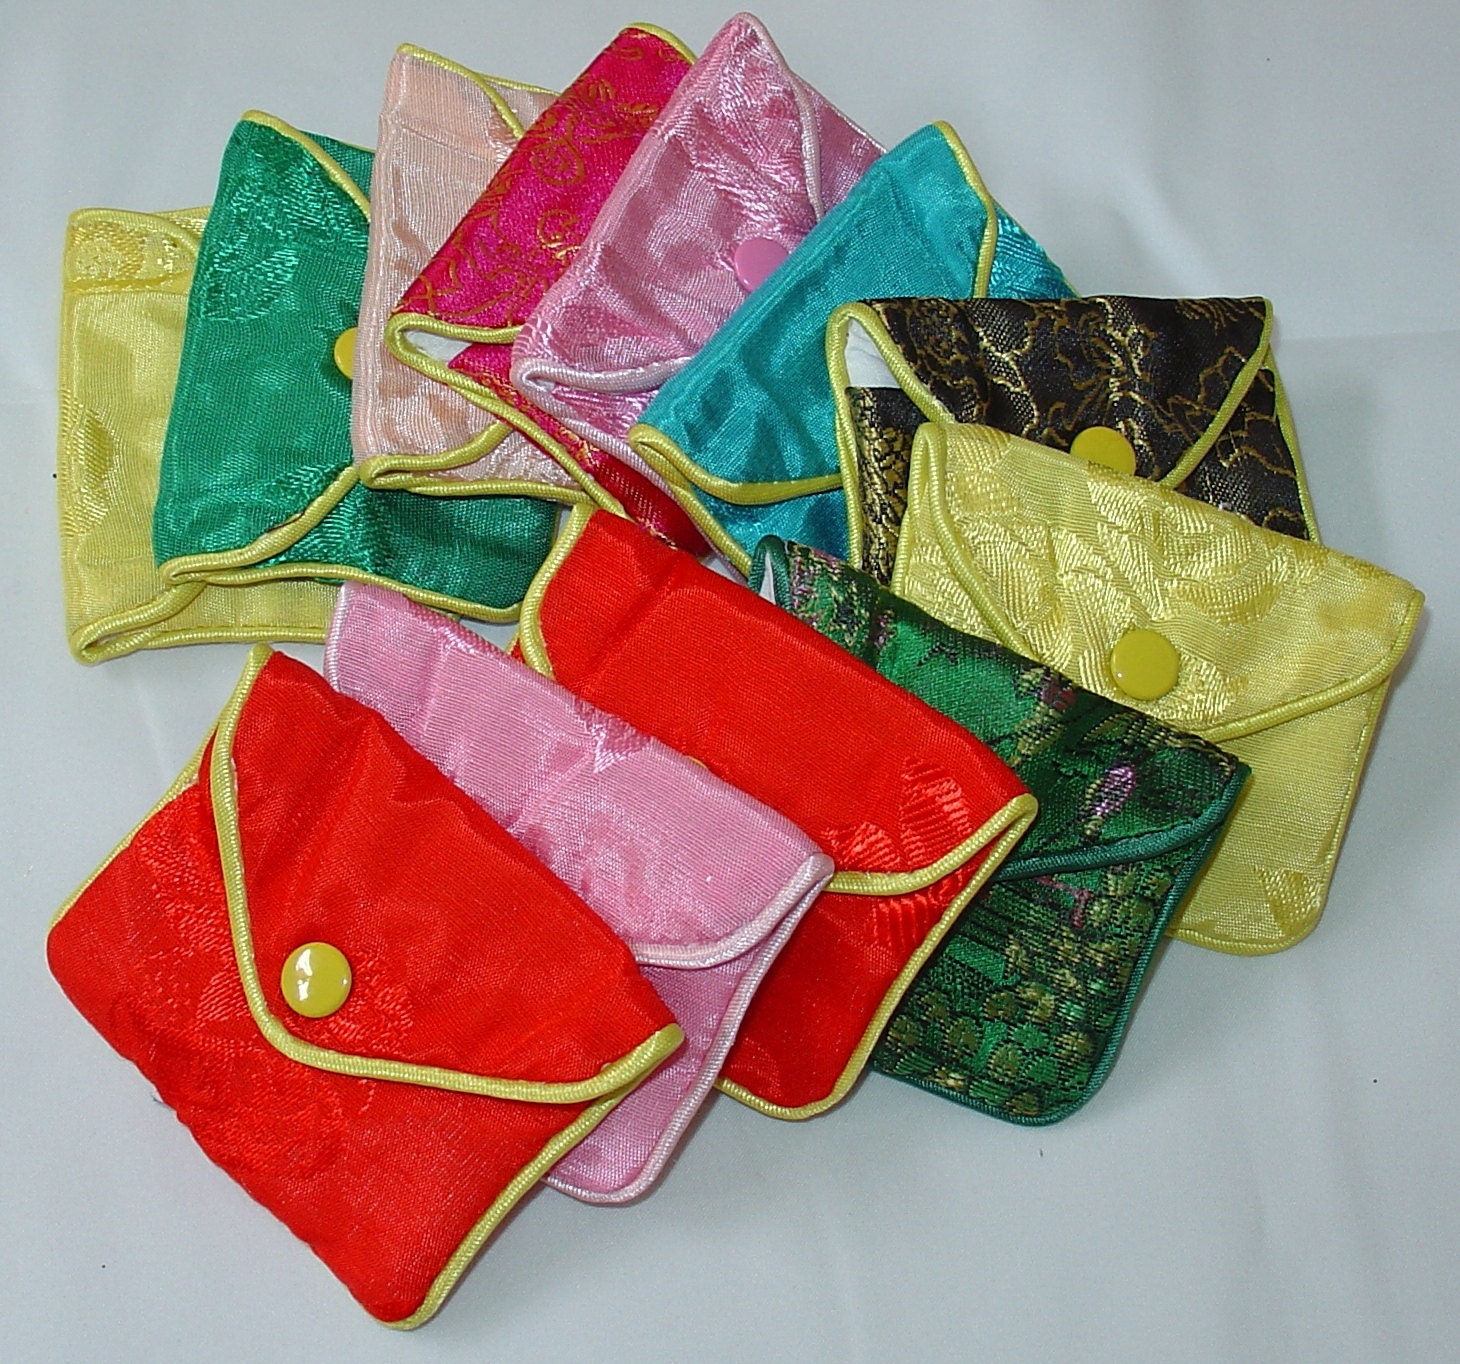 100% Silk Jewelry Pouch Bag with Snap Closure